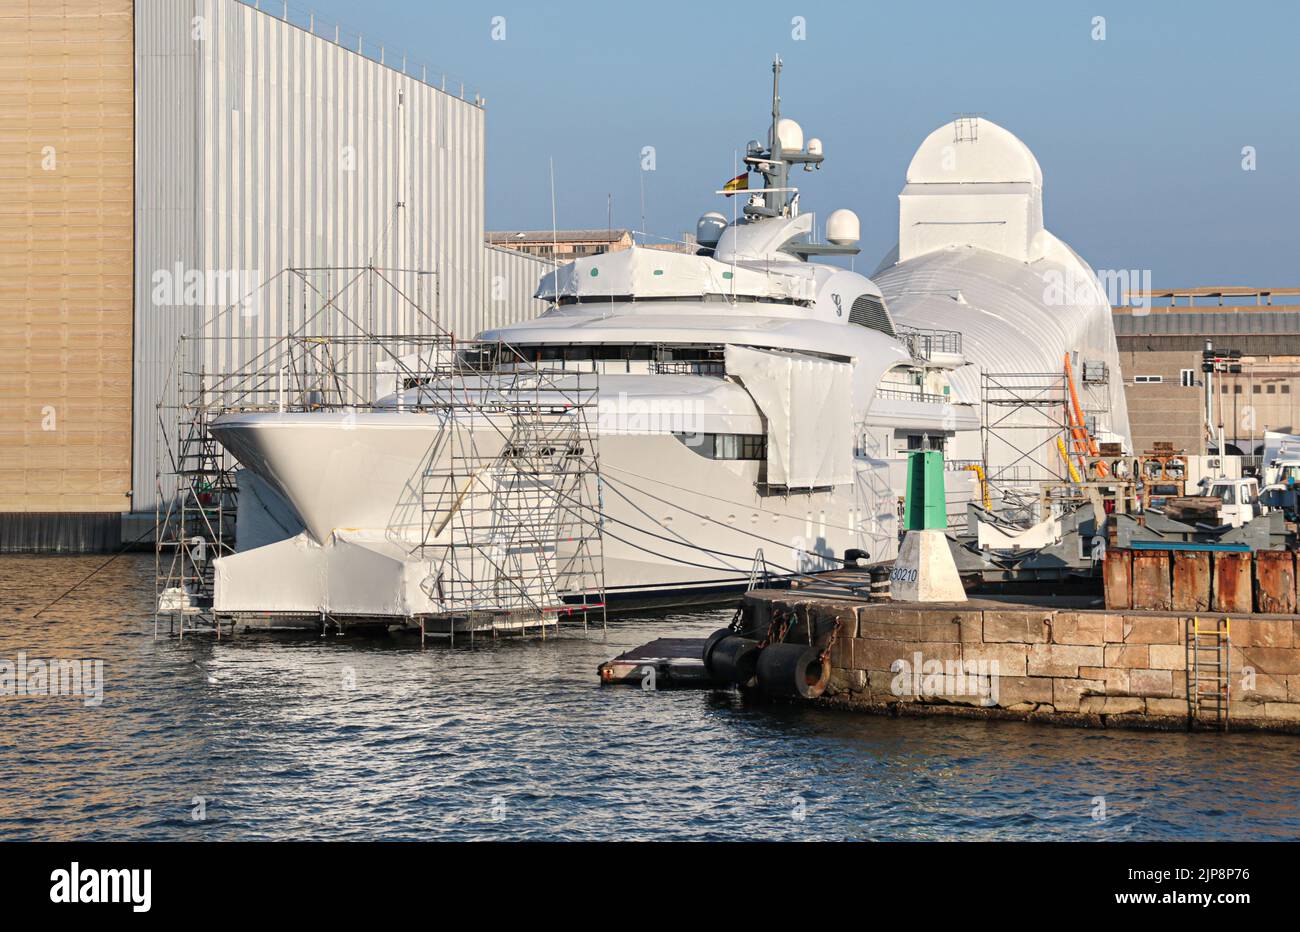 The Vladimir Putin’s superyacht Graceful, renamed Kosatka following international sanctions. Here the yacht during works in shipyard. Yacht picture Stock Photo